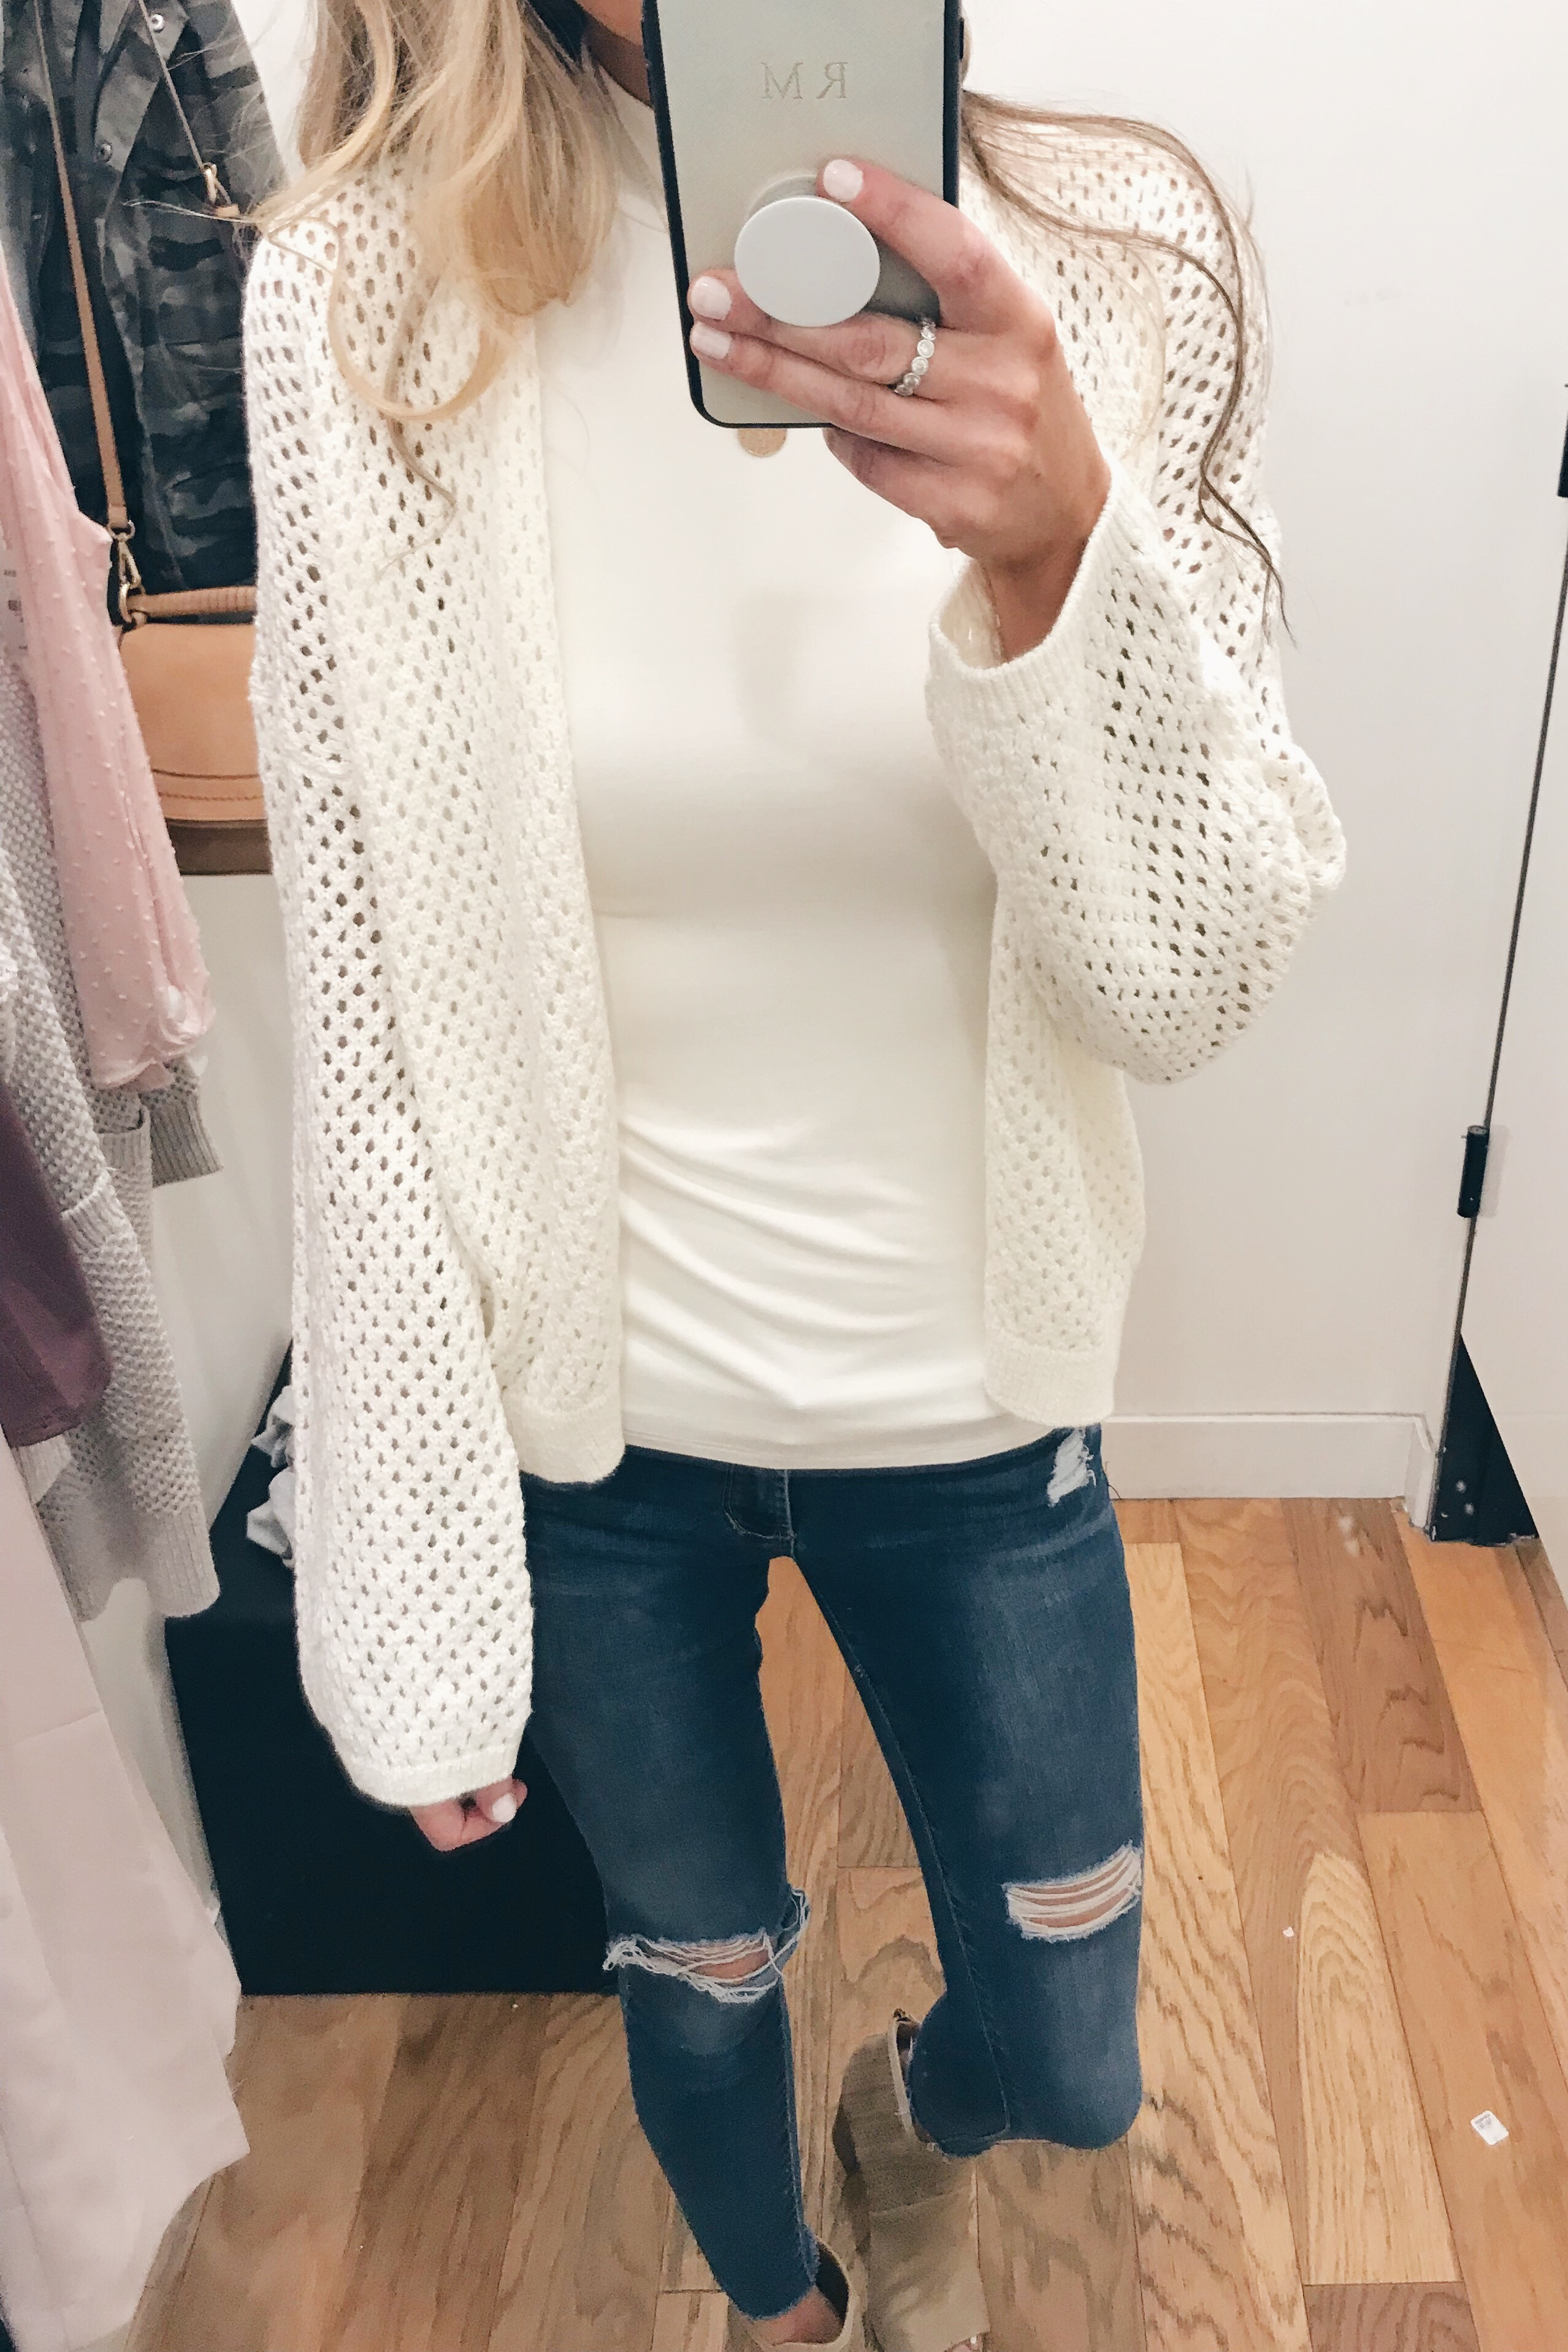 express sale try on 2019 - open knit ivory cardigan and mock neck tank on Pinteresting Plans blog